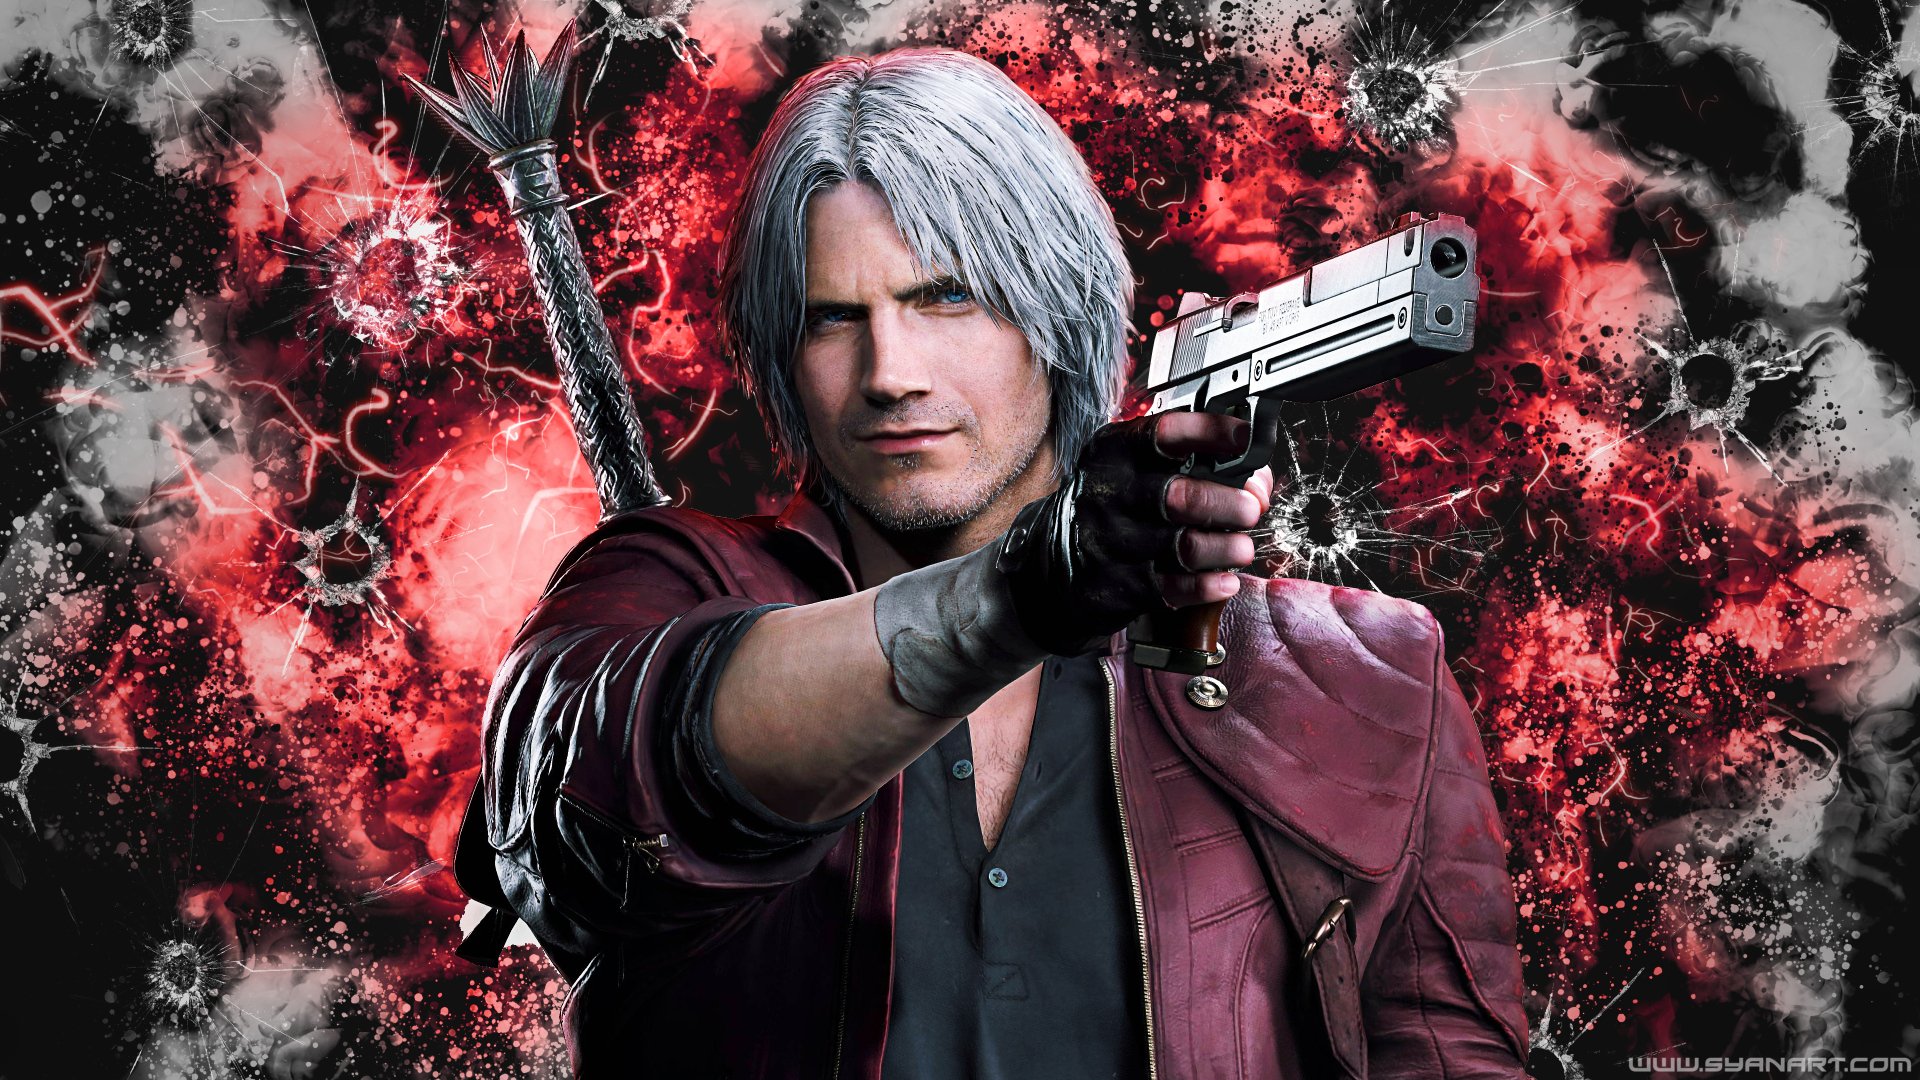 Video game, Dante, Devil May Cry 5, 2018 wallpaper. Can't wait